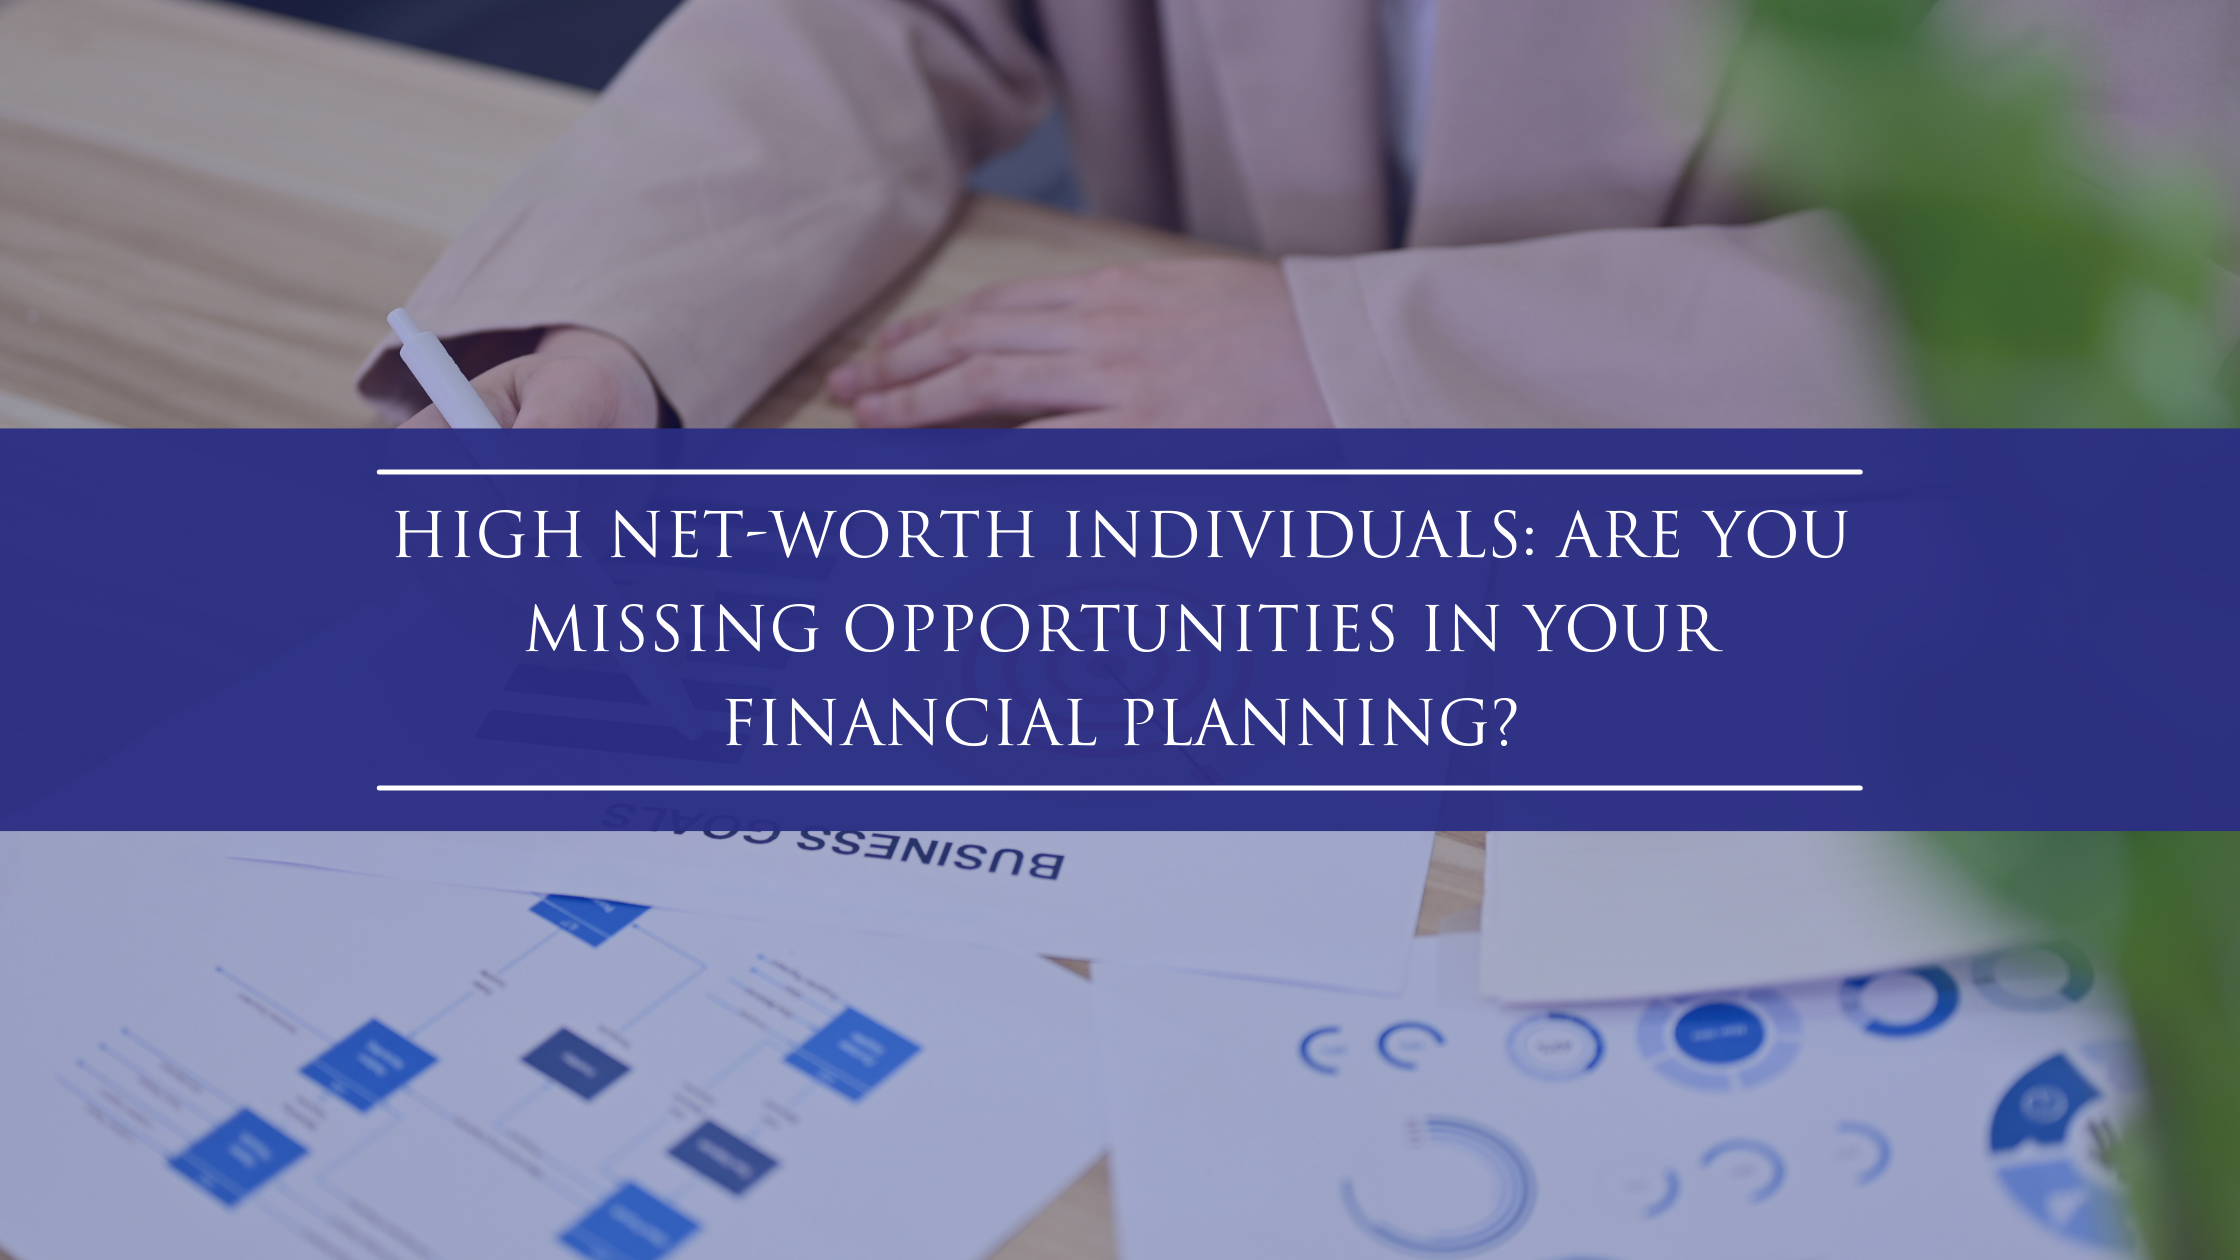 High Net-Worth Individuals: Are You Missing Opportunities in Your Financial Planning?